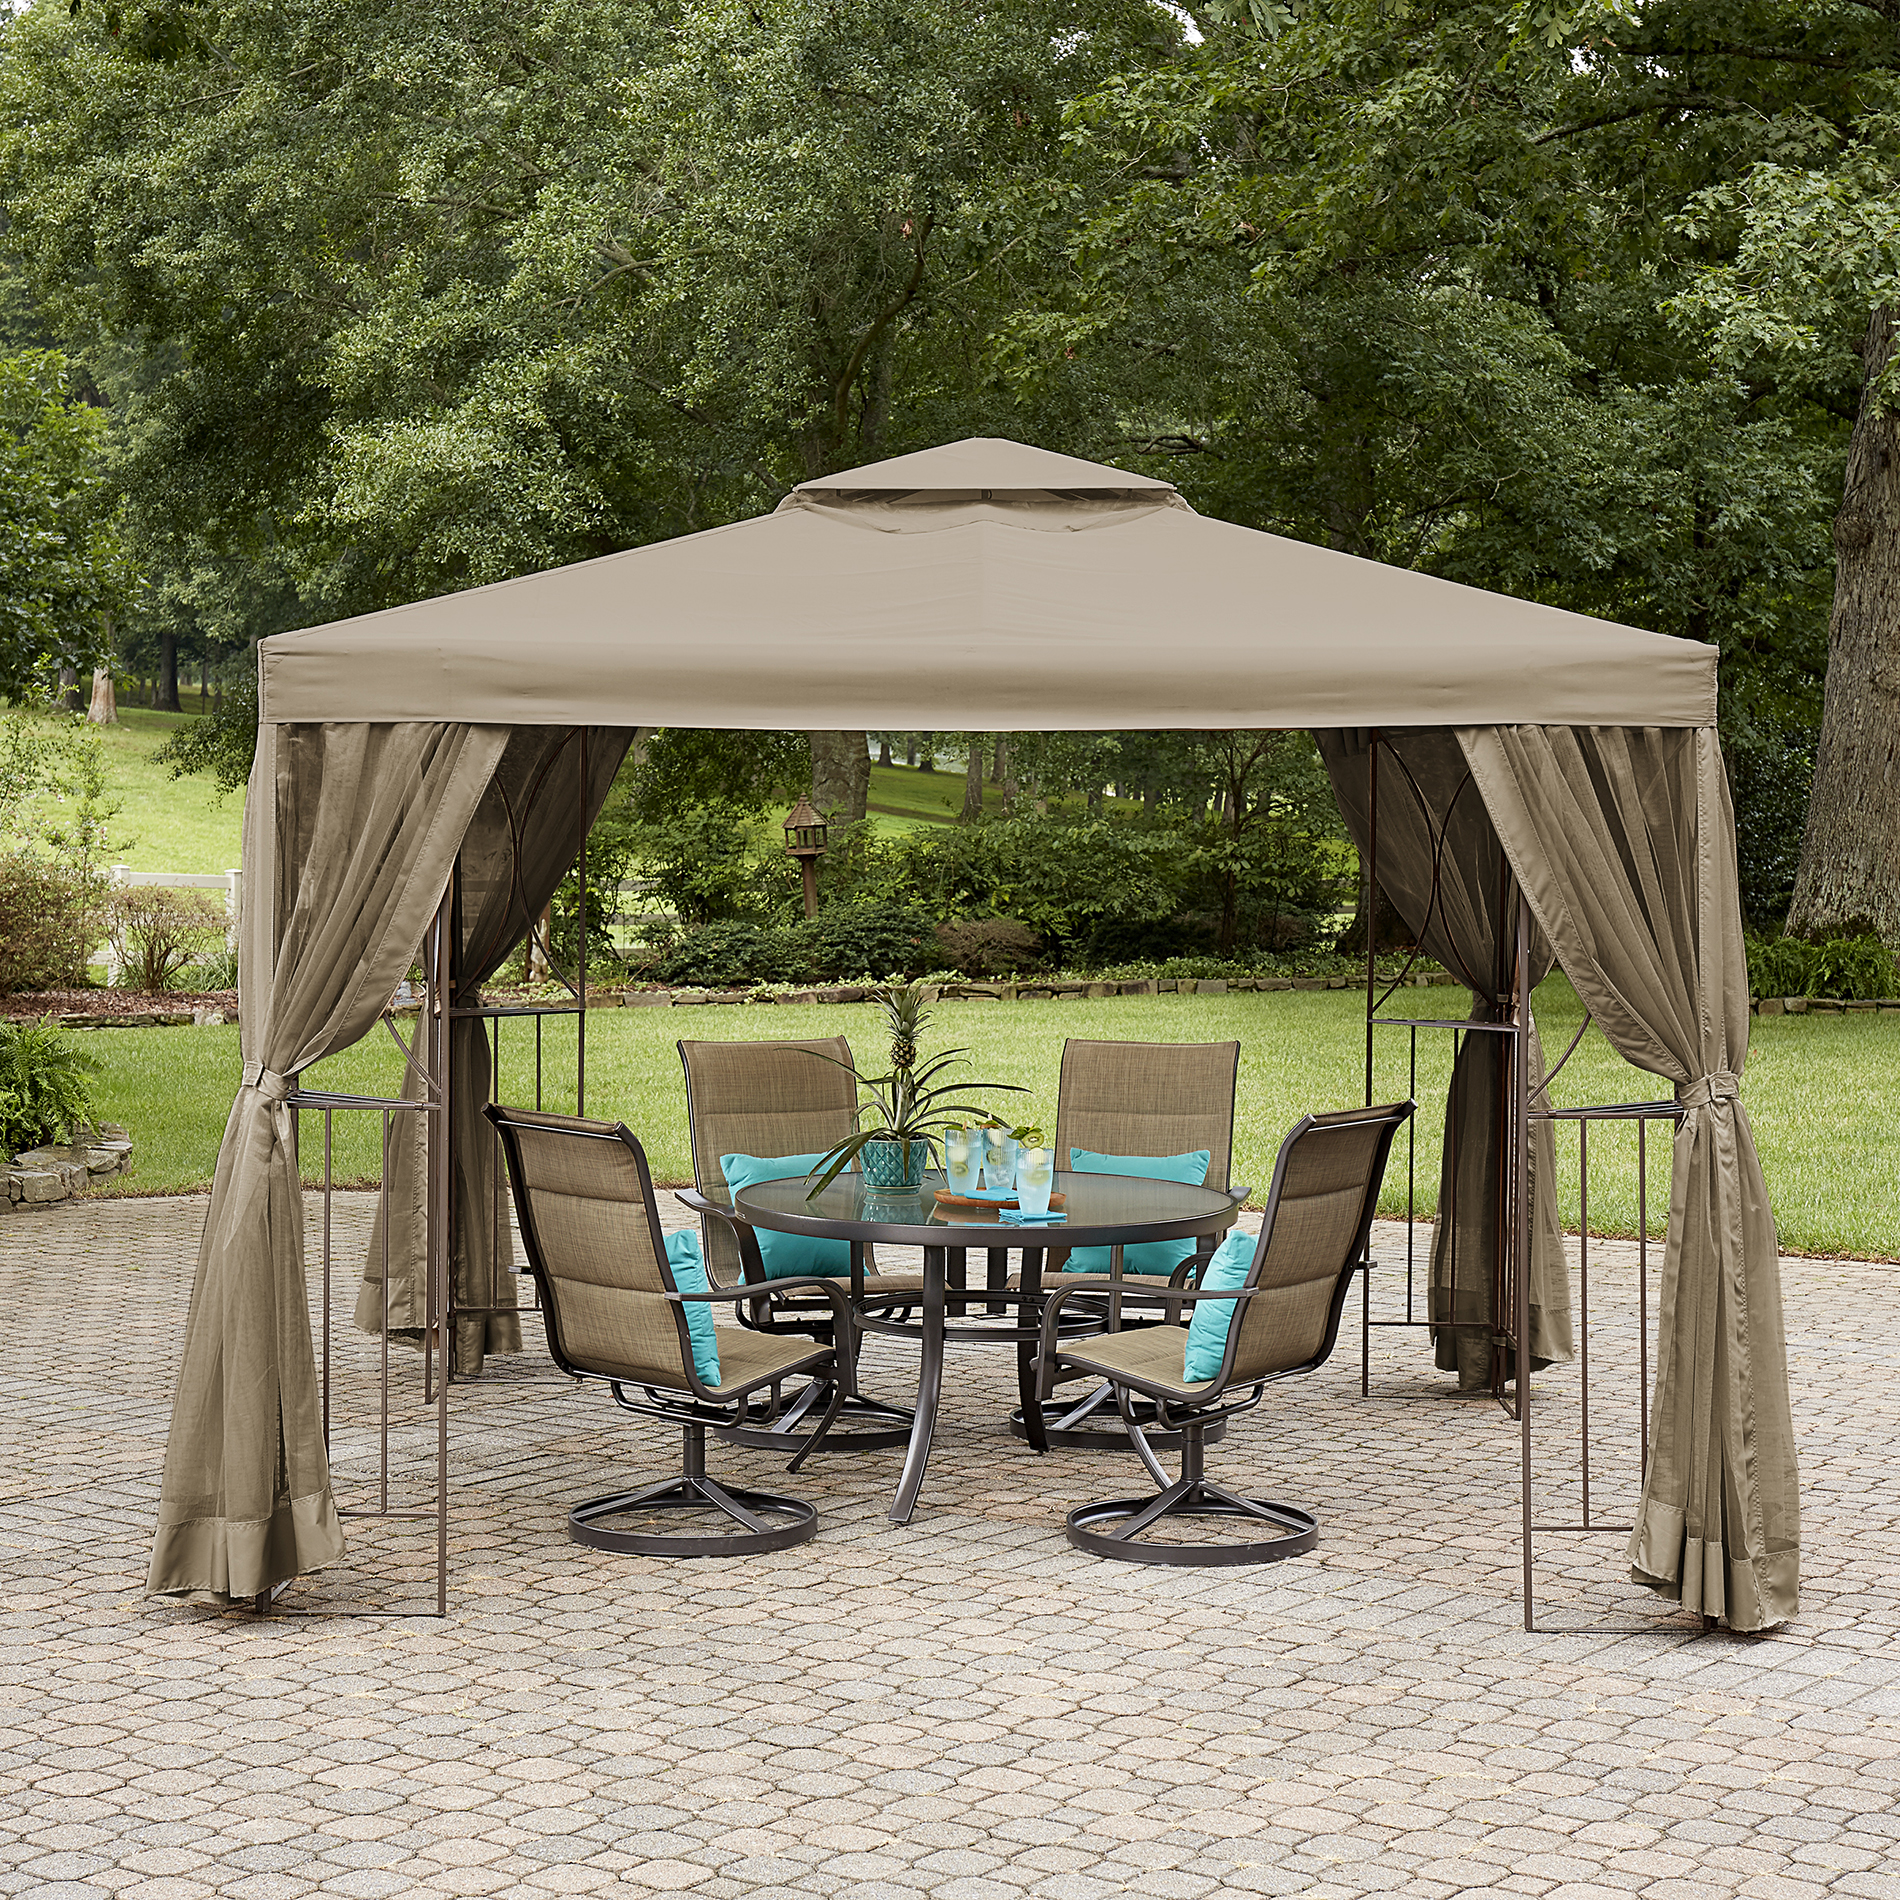 Garden Oasis Lakeville 10' x 10' Canopy Gazebo with Insect ...